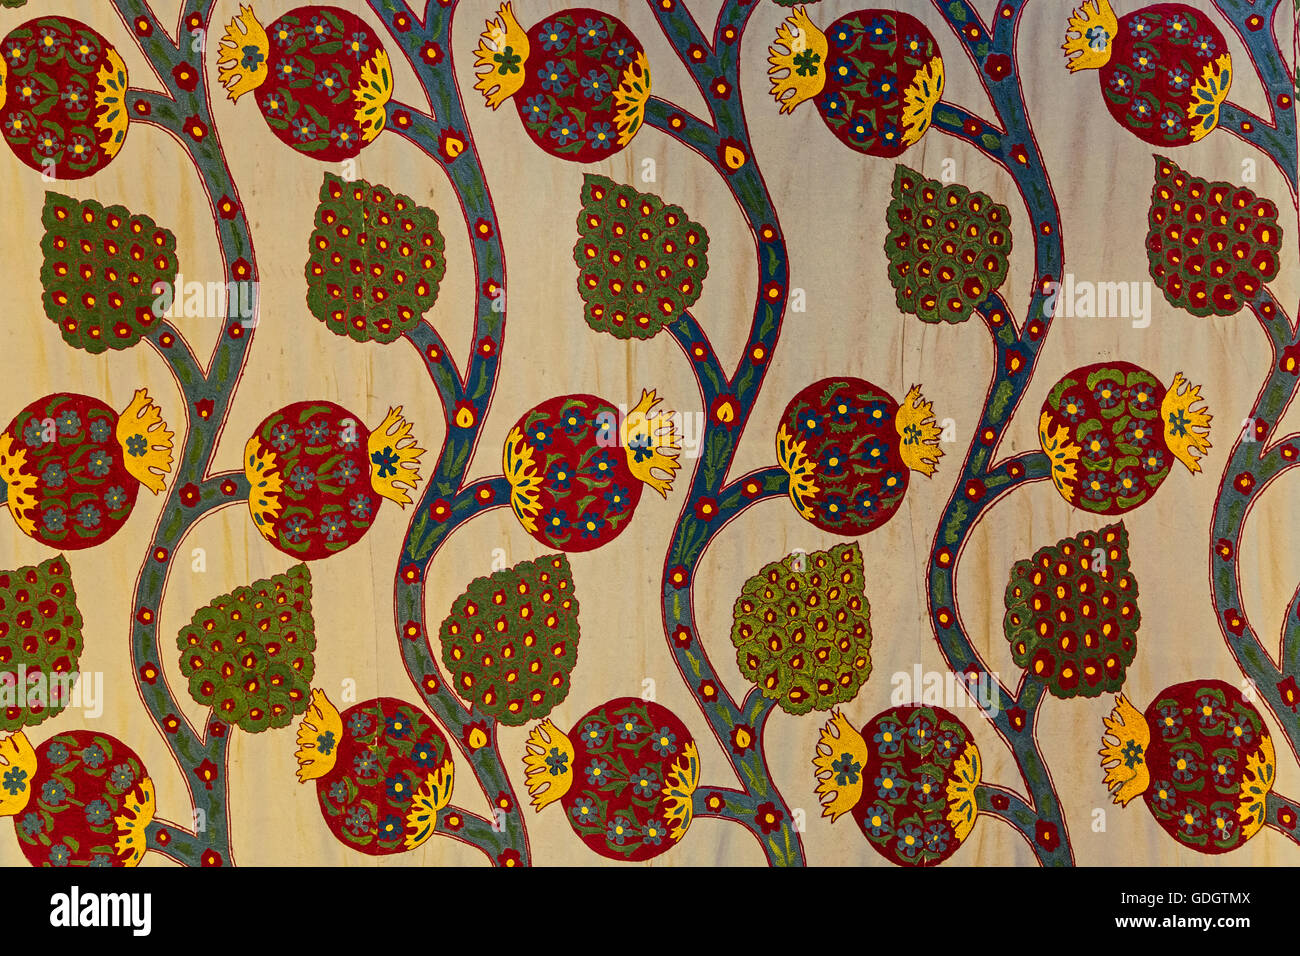 Piece of an old textile representing pomegranate design. Stock Photo